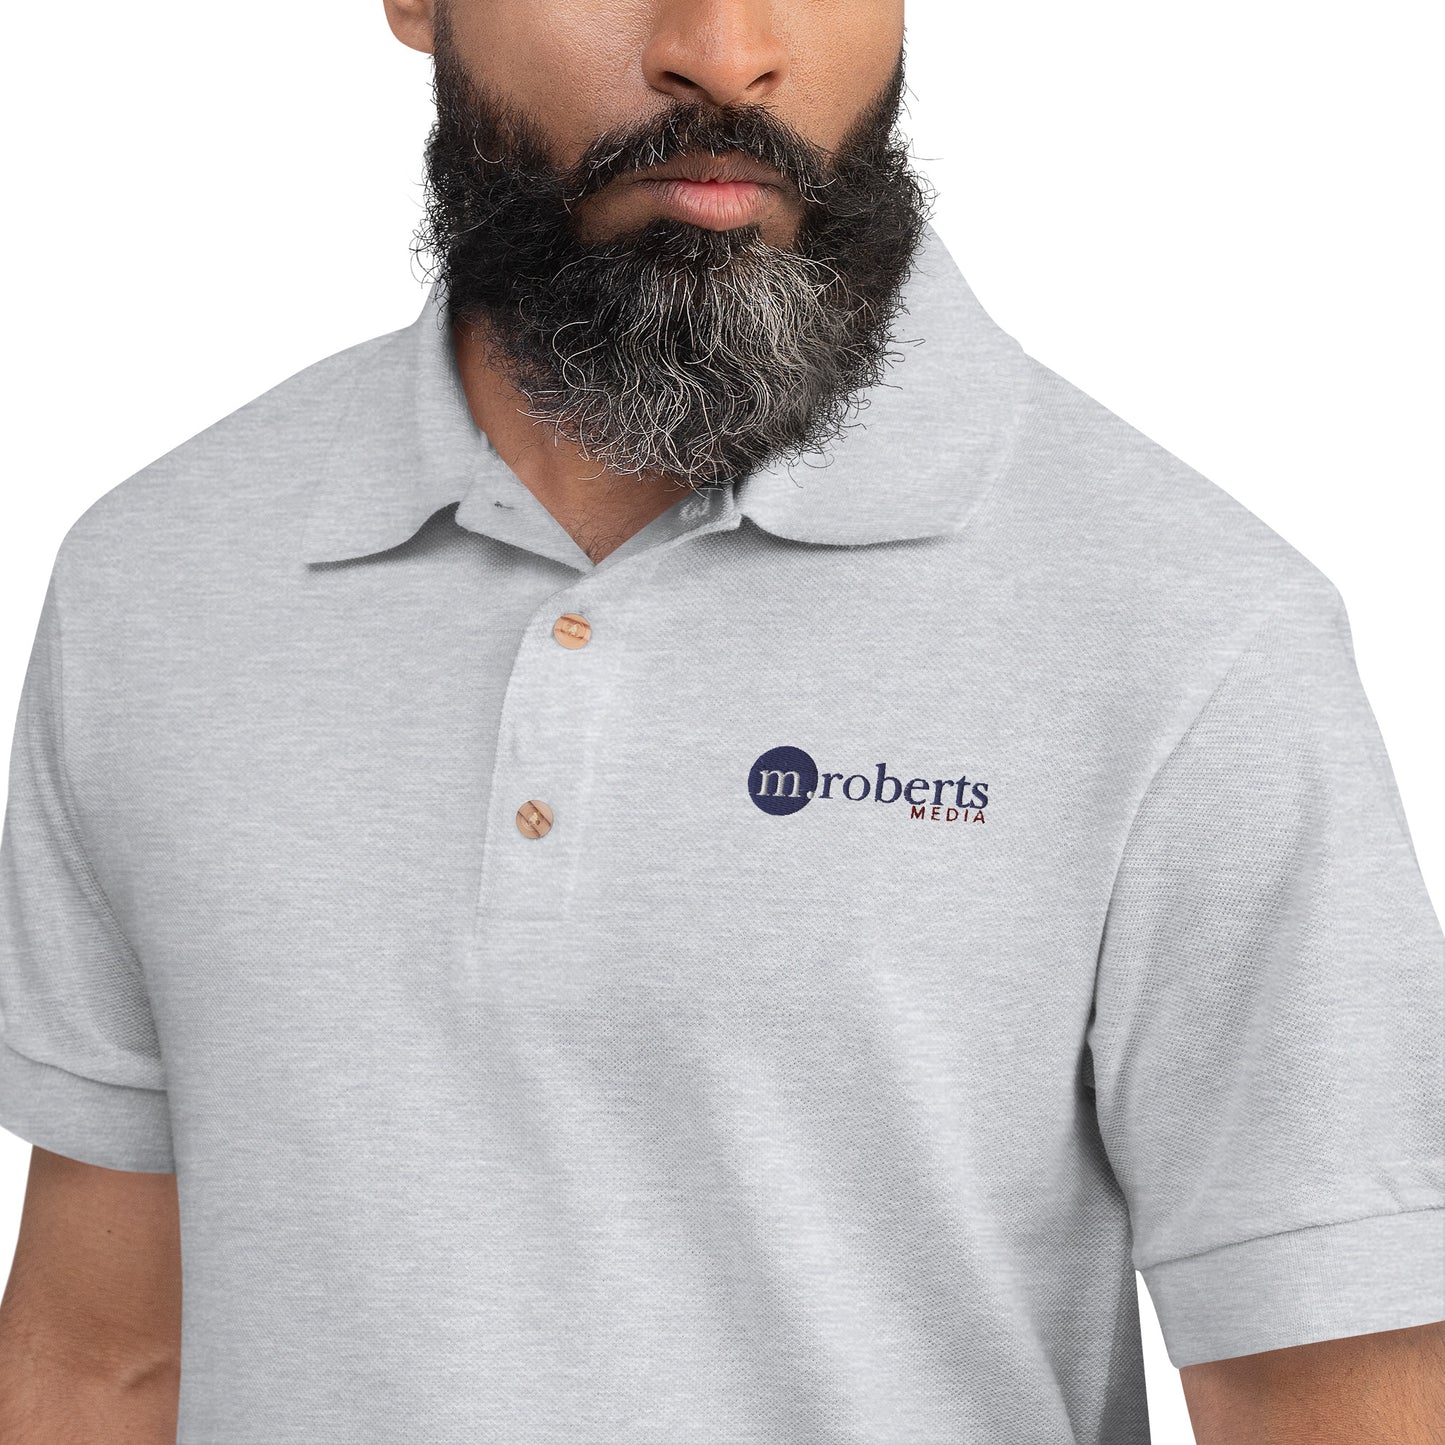 M. Roberts Media - Embroidered Polo Shirt